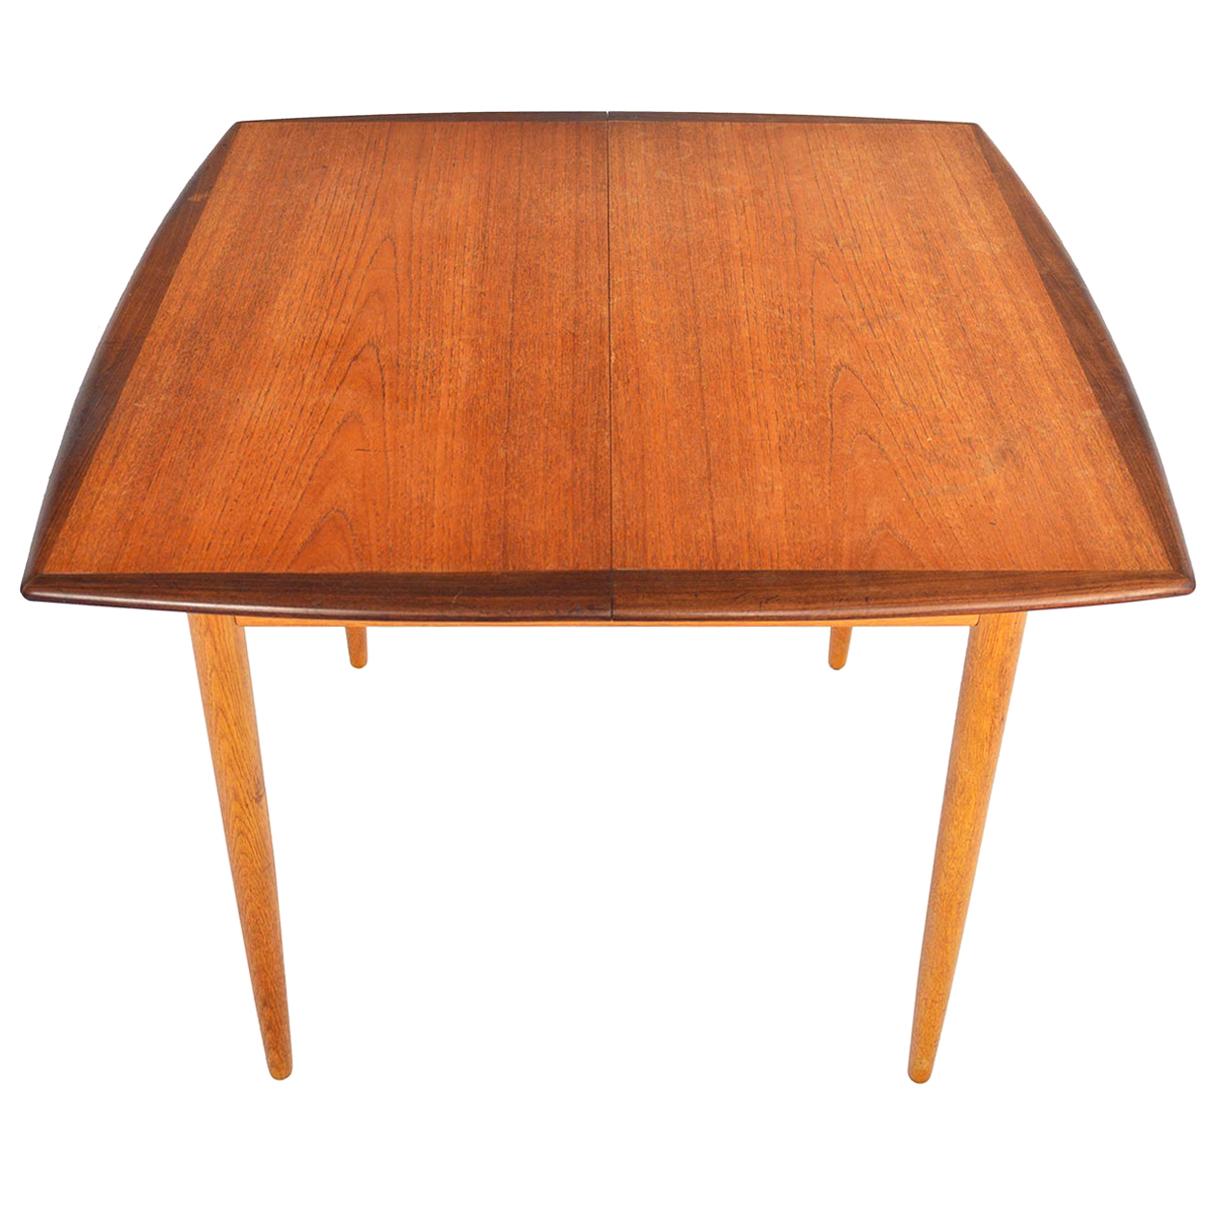 Square Teak and Oak Danish Modern Butterfly Leaf Midcentury Dining Table